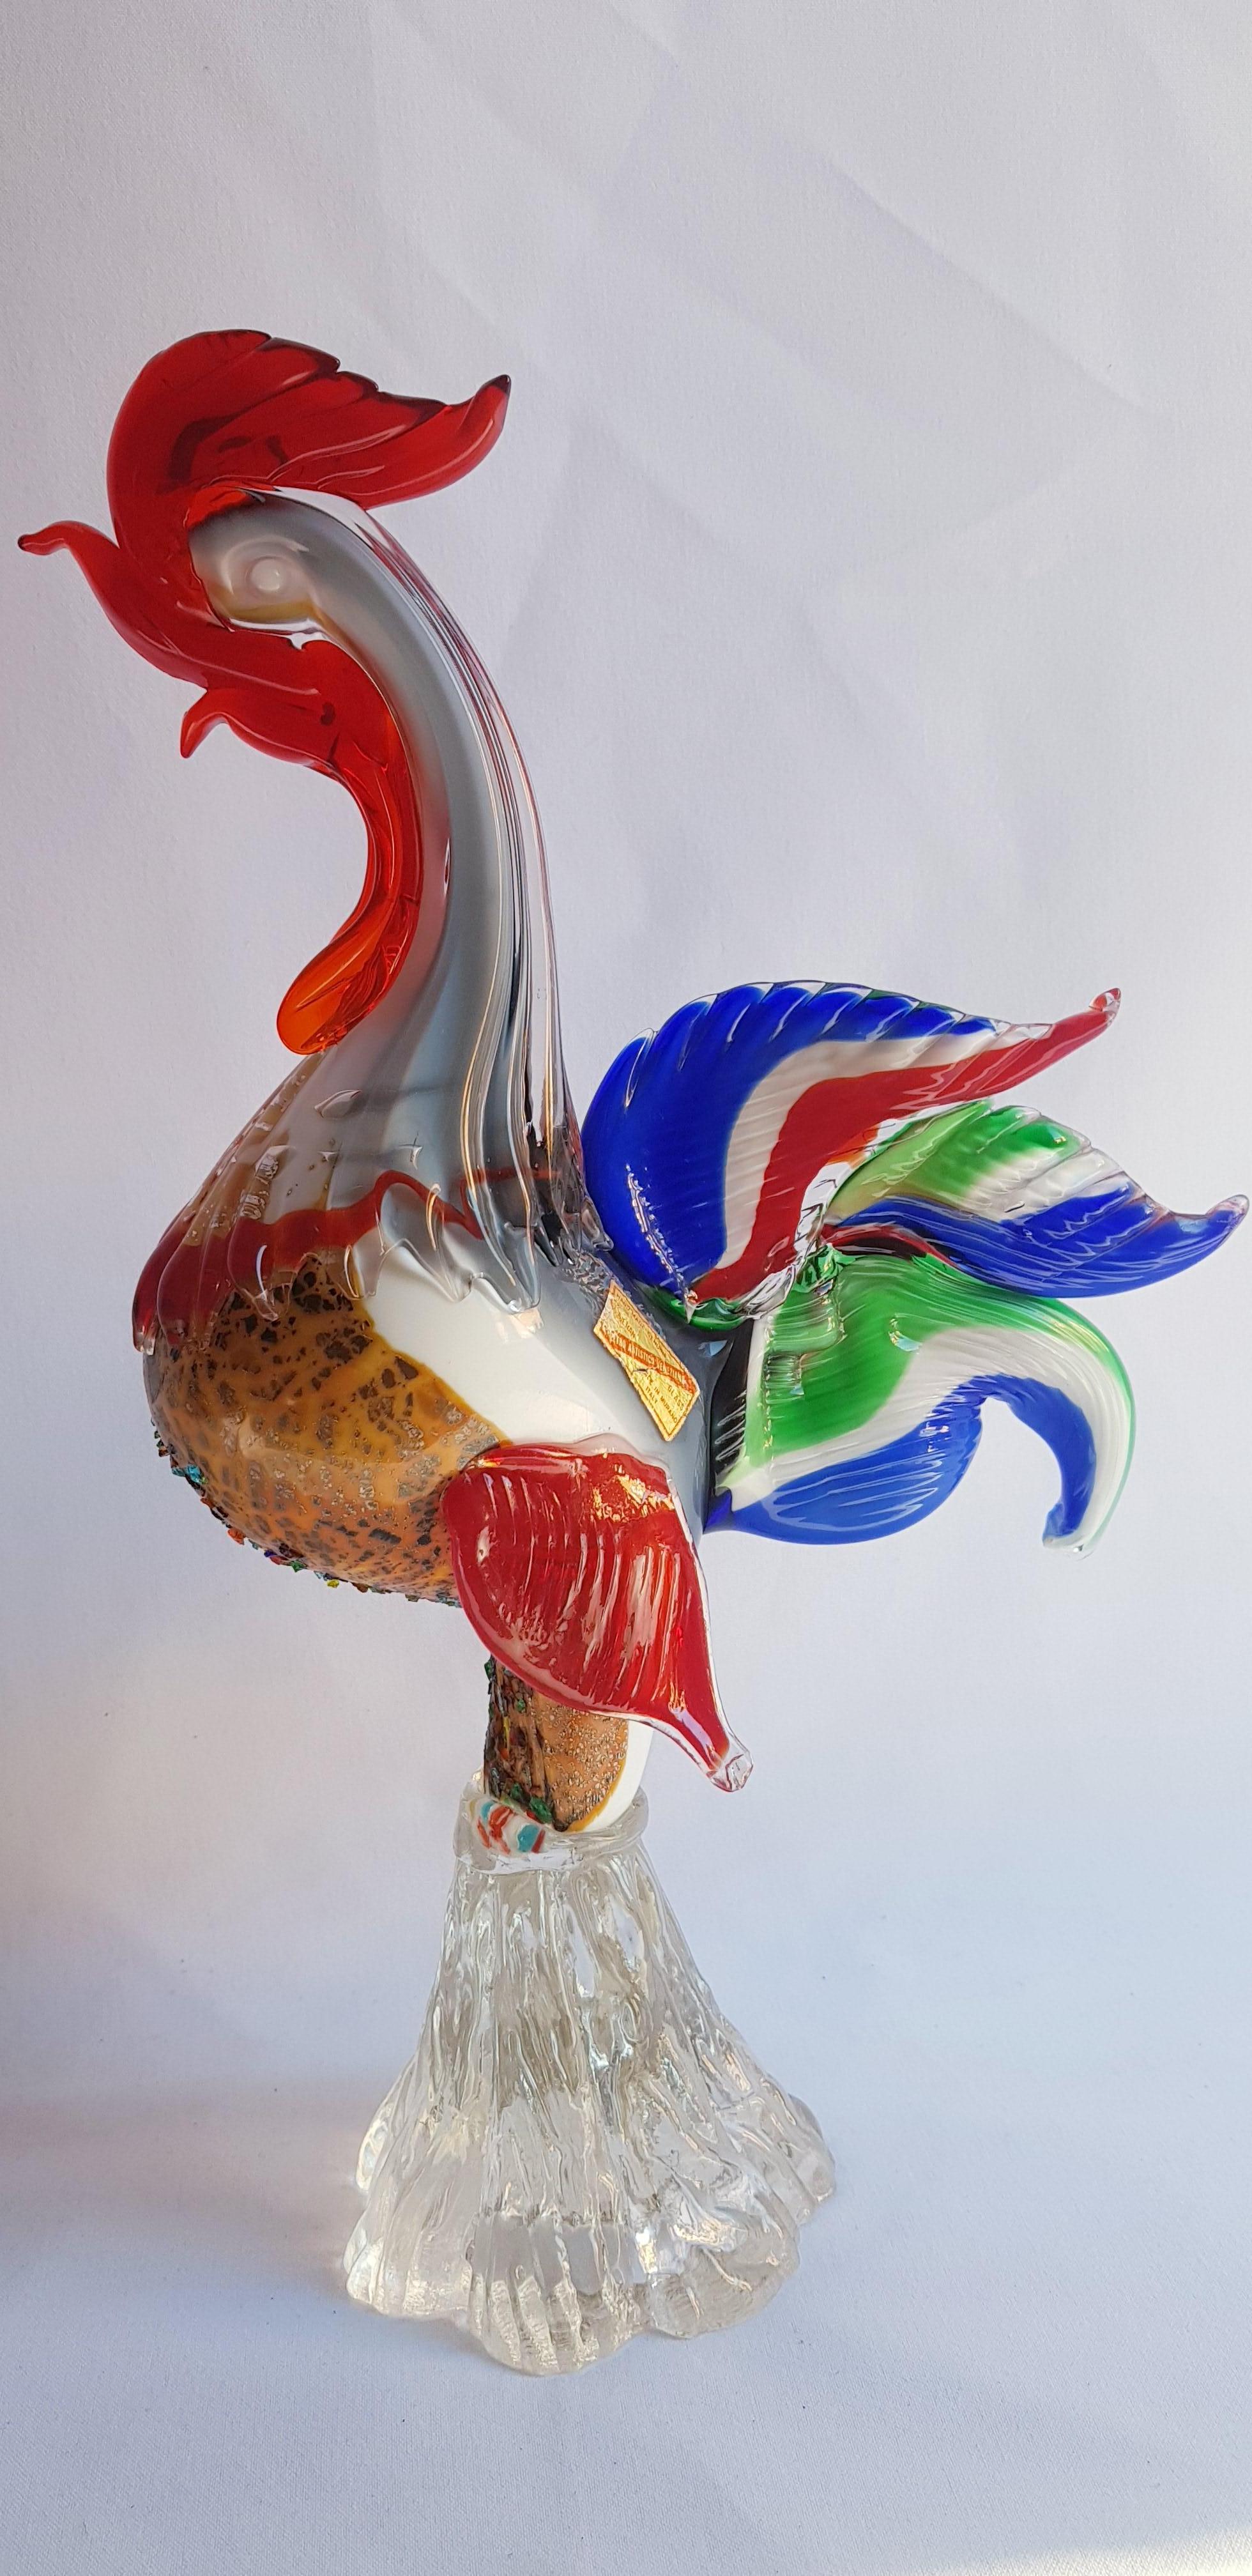 Genuine Murano glass multi-coloured rooster with platinum leaf on the breast, attributed to Fratelli Pitau; years 1950-1958. In excellent condition and with original sticker present.